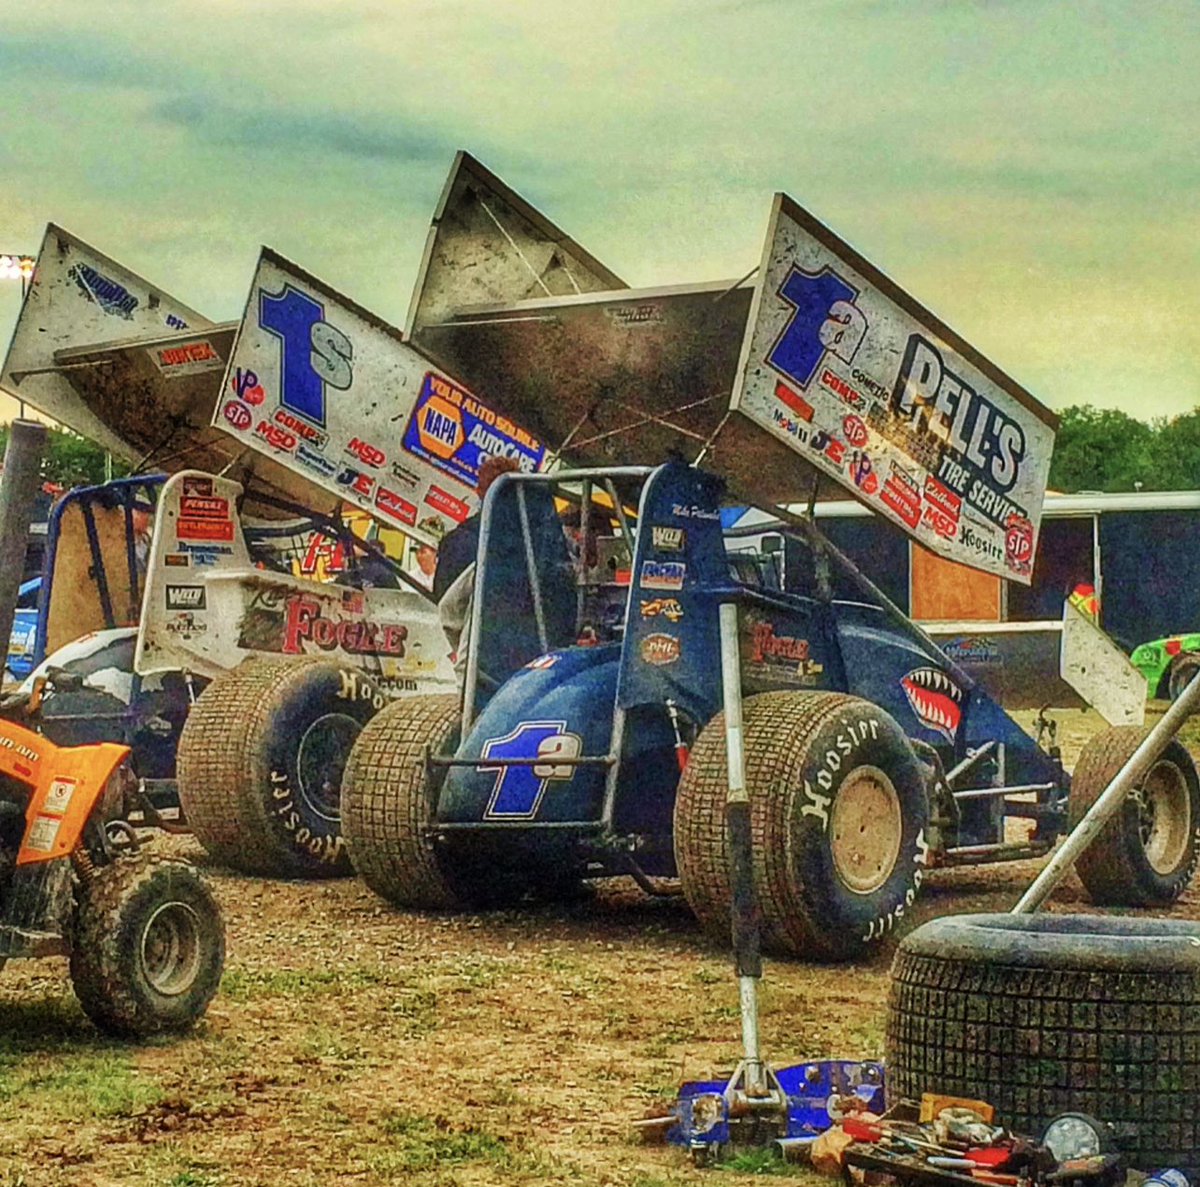 I took this picture on July 29th, 2014 at Oshweken Speedway. I had just spent the week in Canada hanging out with the Shark team. Crew guys slept under the cars in their one trailer pulling 2 cars. They got 1 room so everyone on the team could shower. Tonight they won a million.